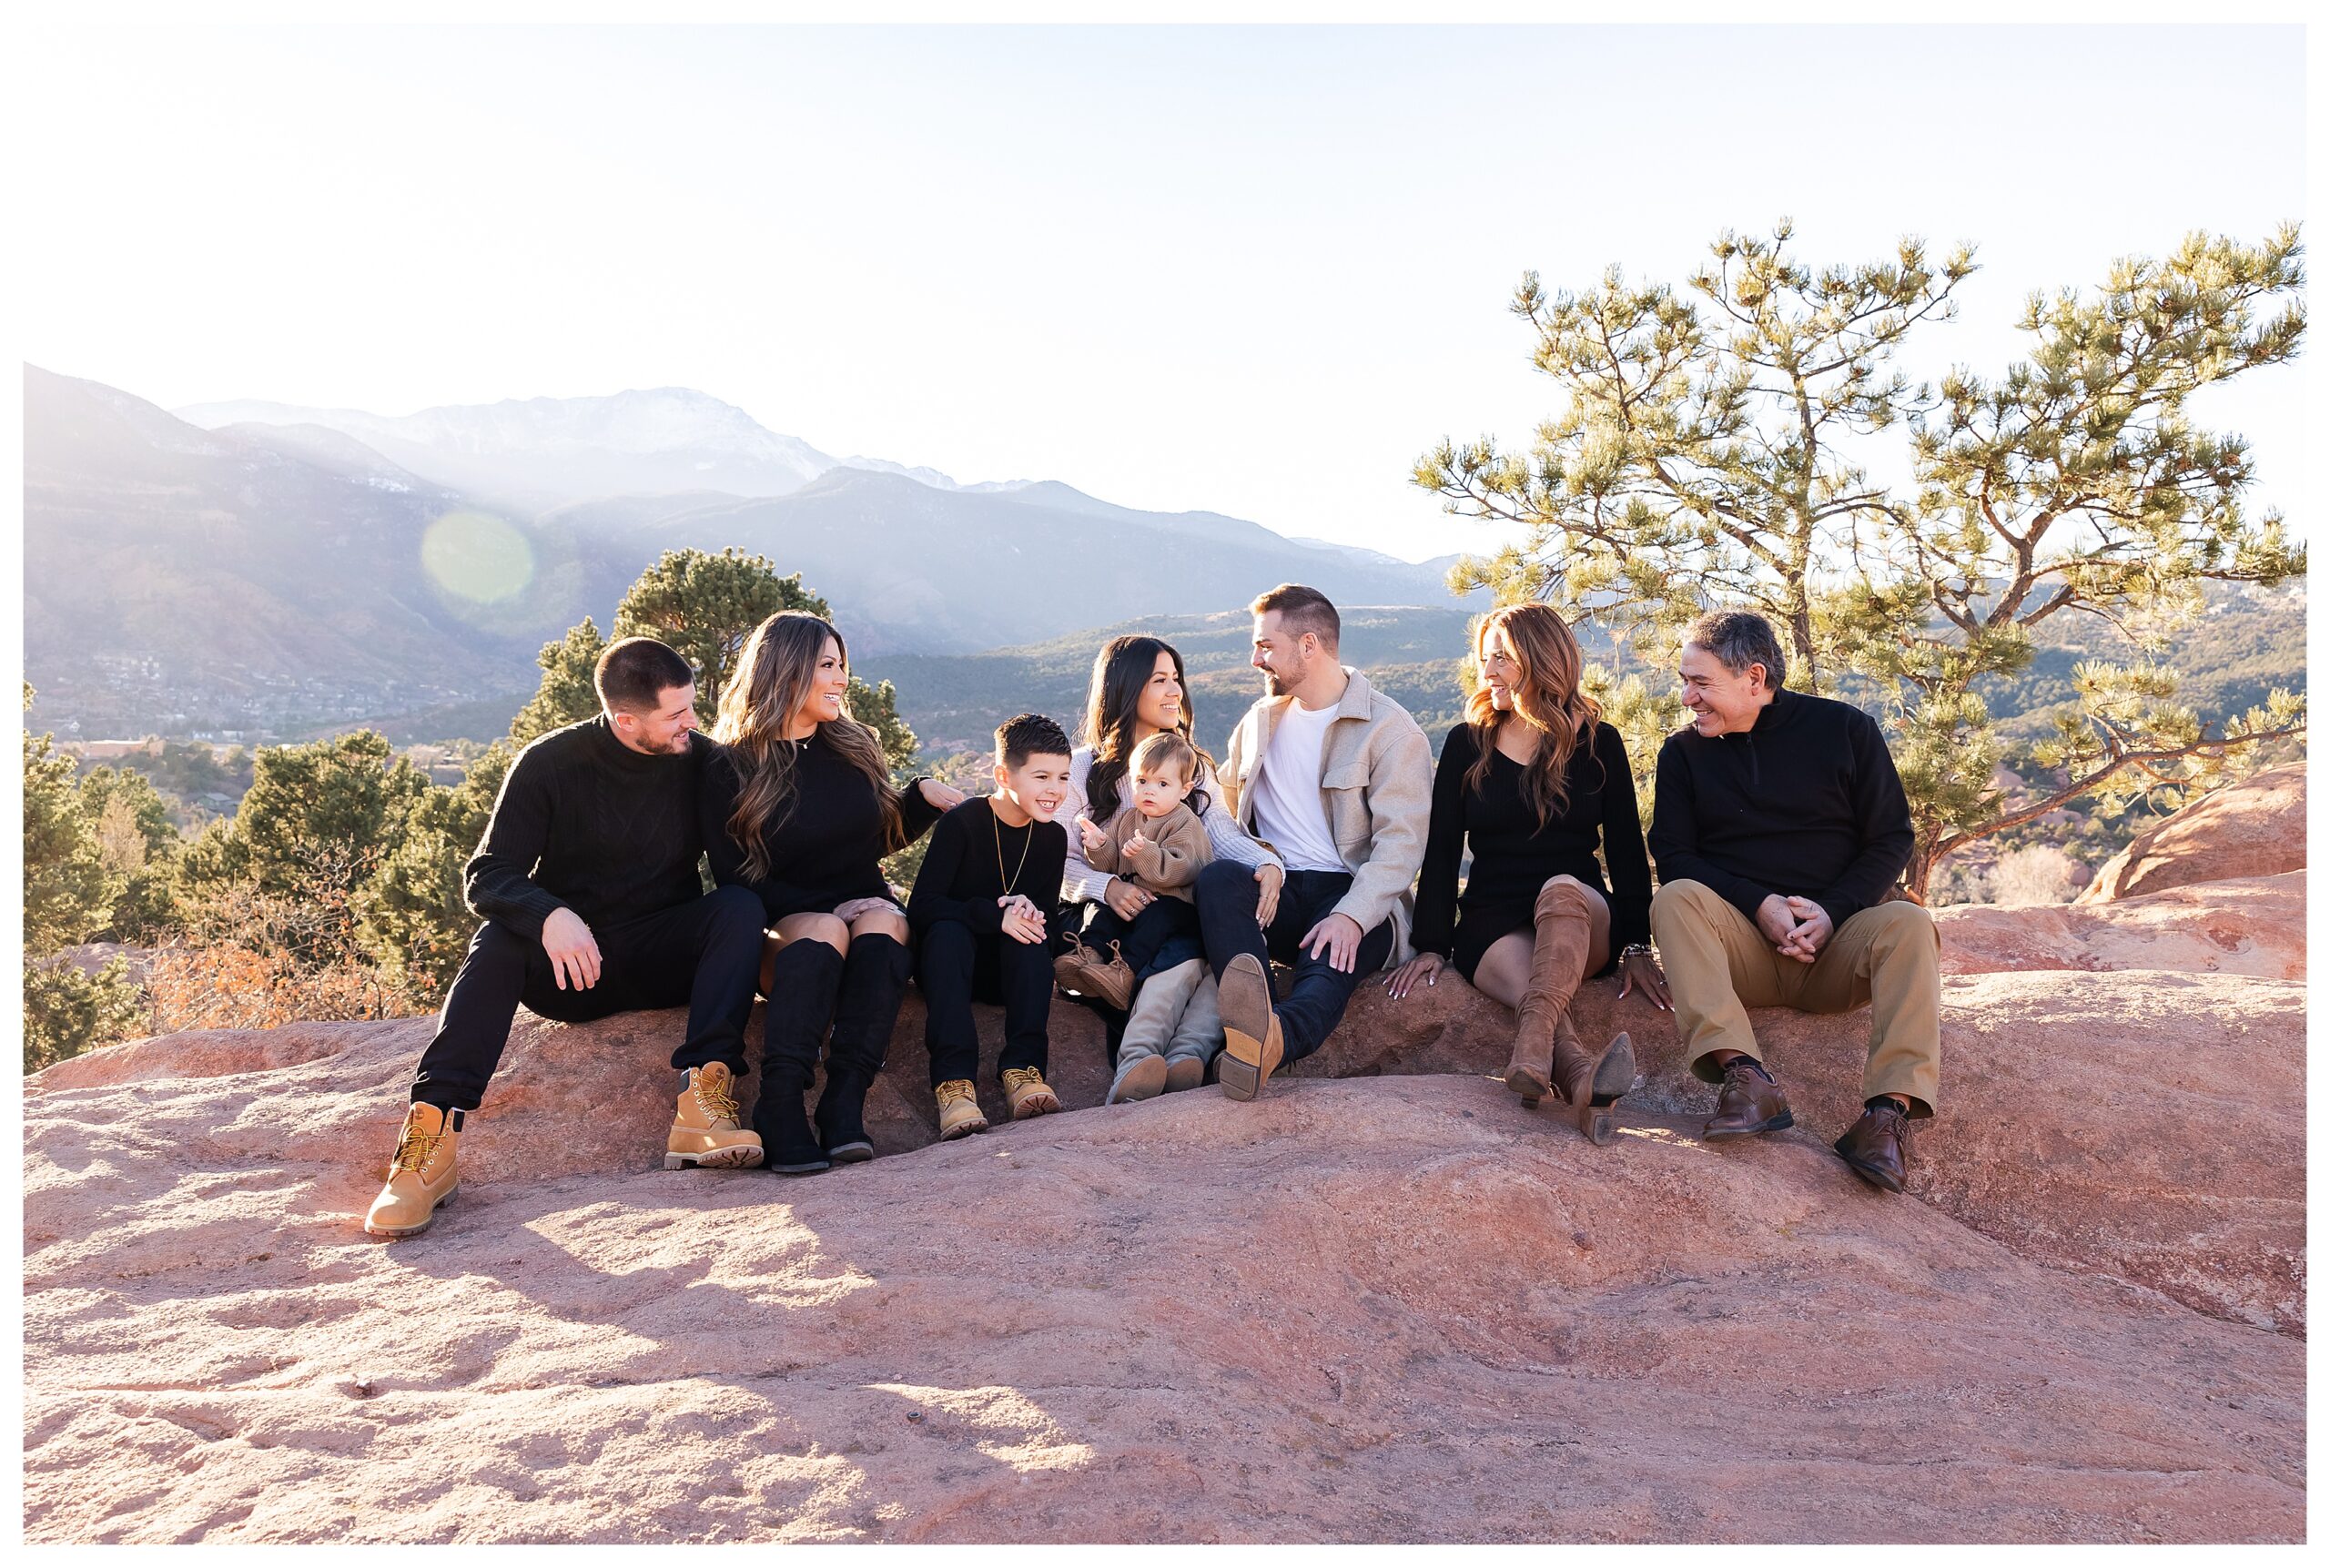 Extended family reunion photos in Colorado Springs at Garden of the Gods High Point Overlook